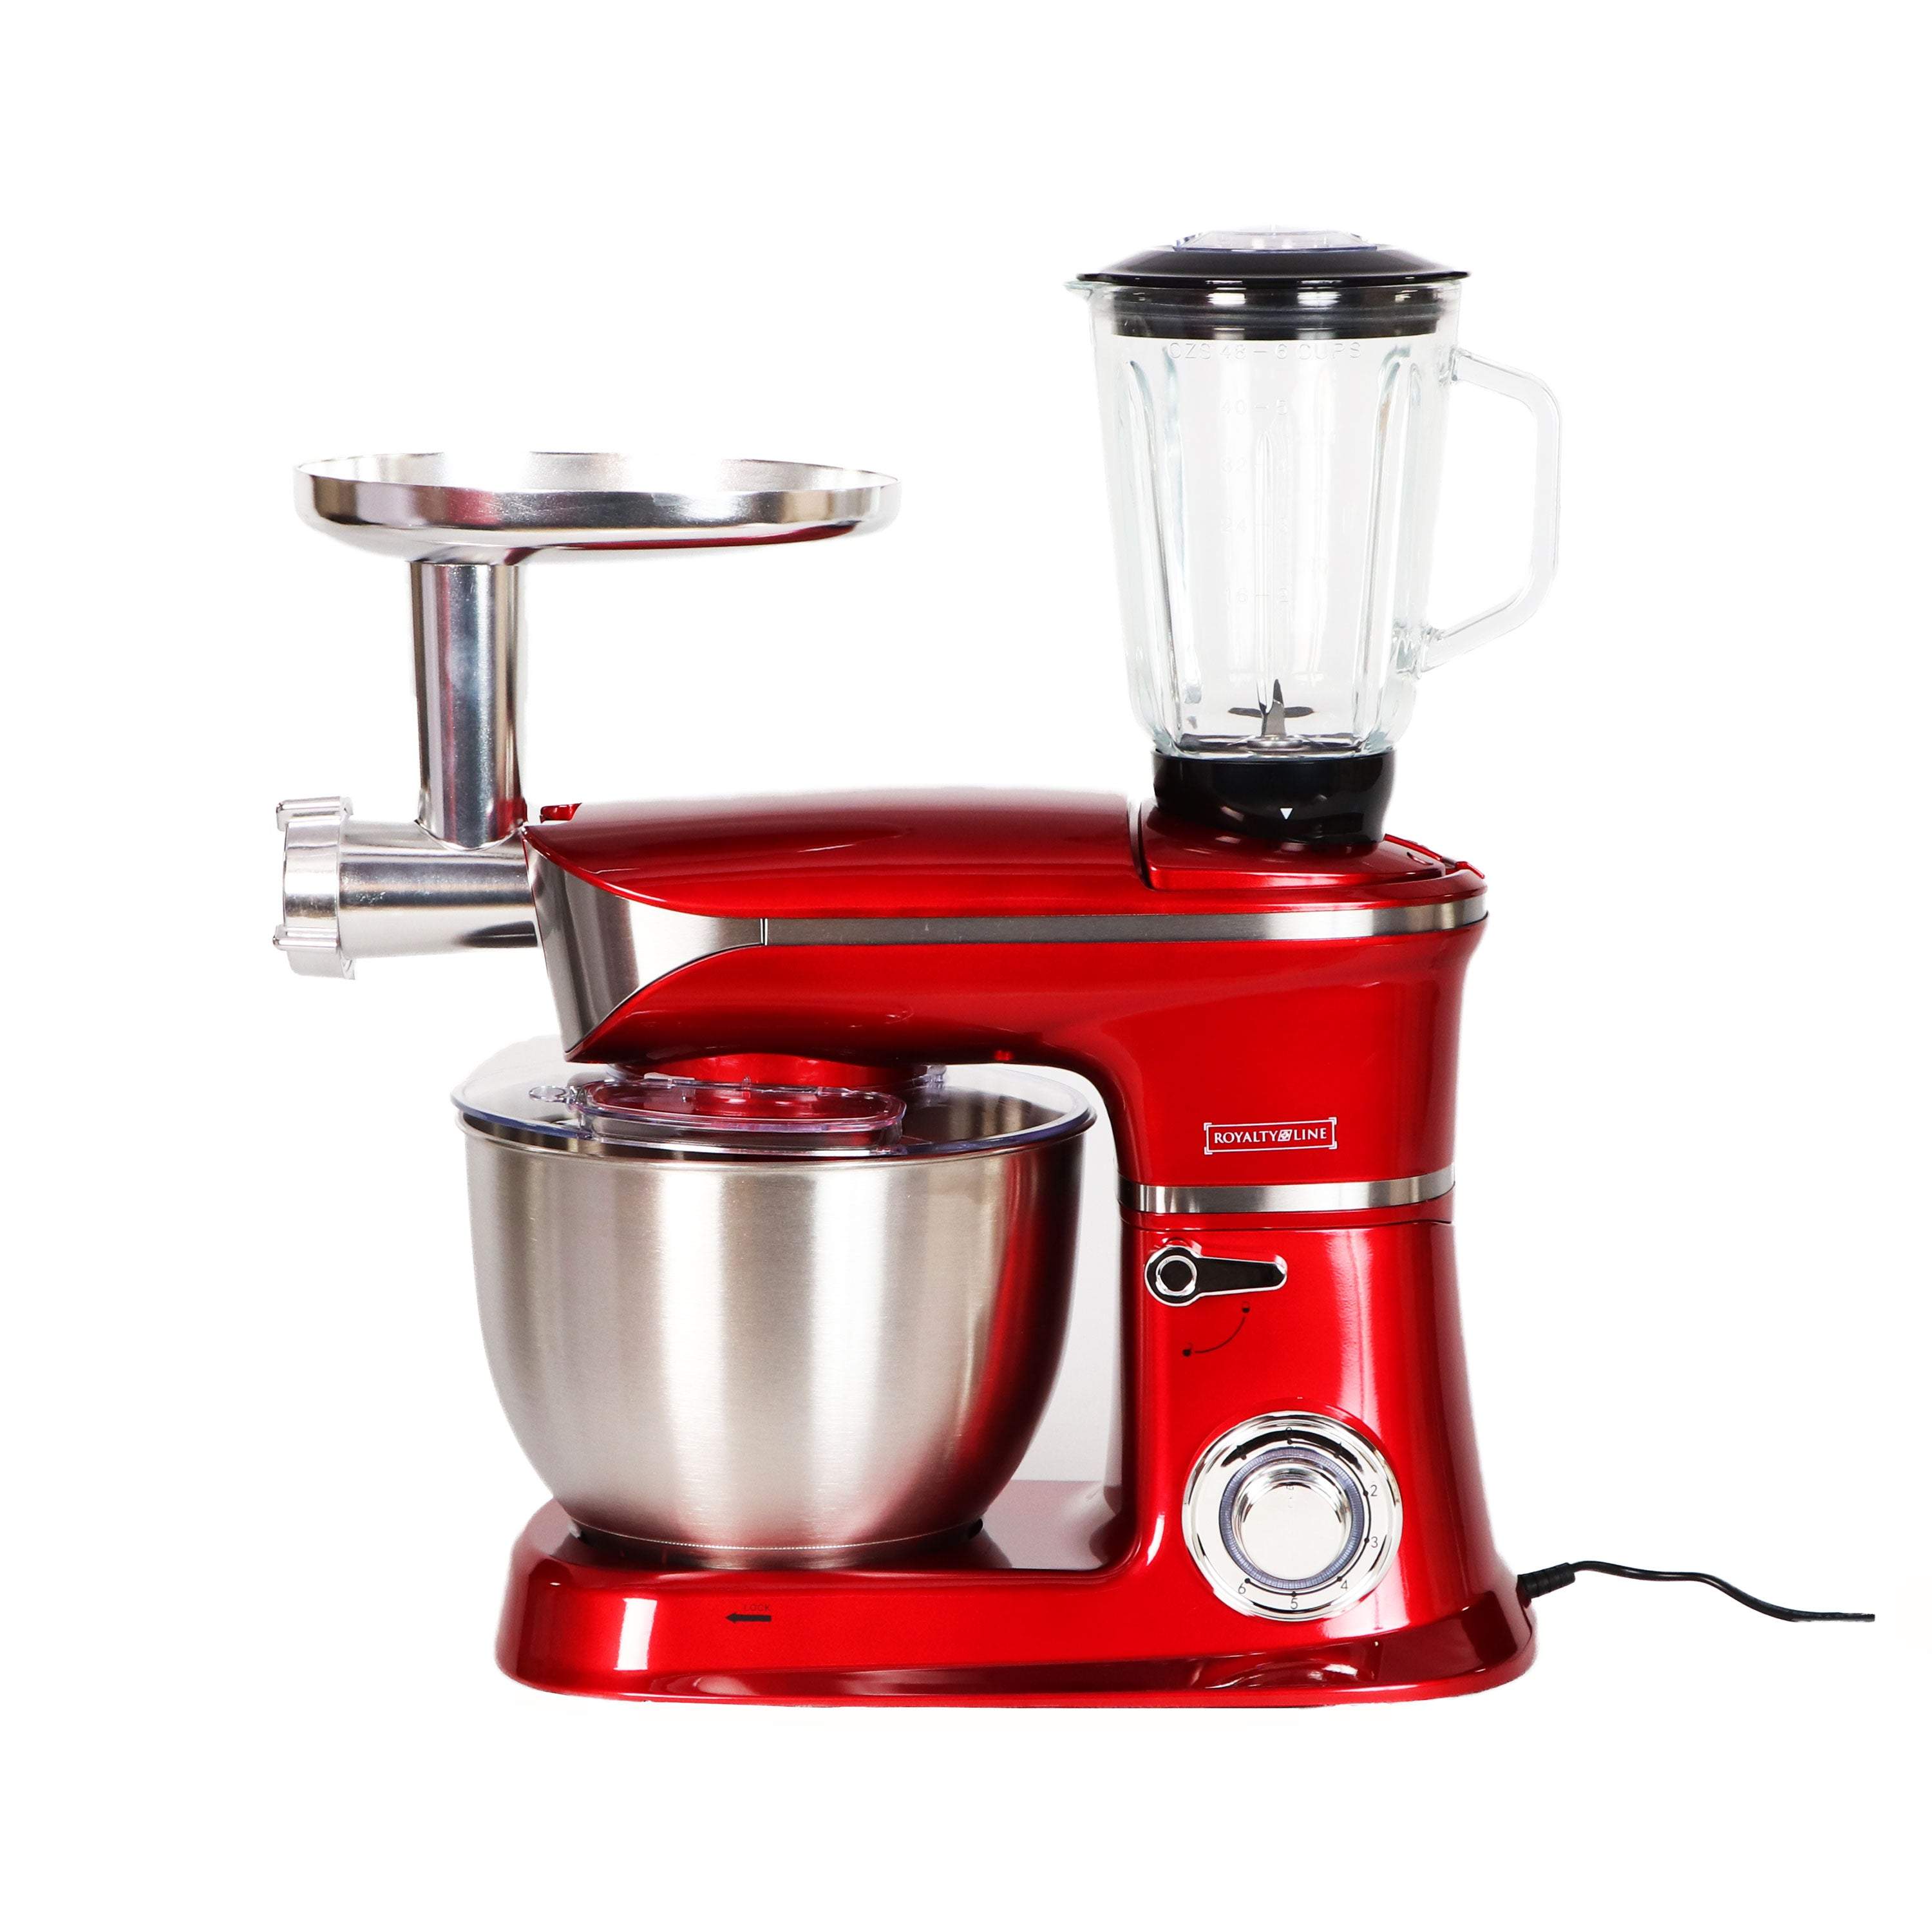 Royalty Line Multifunctional Stand Mixer-Royal Brands Co-